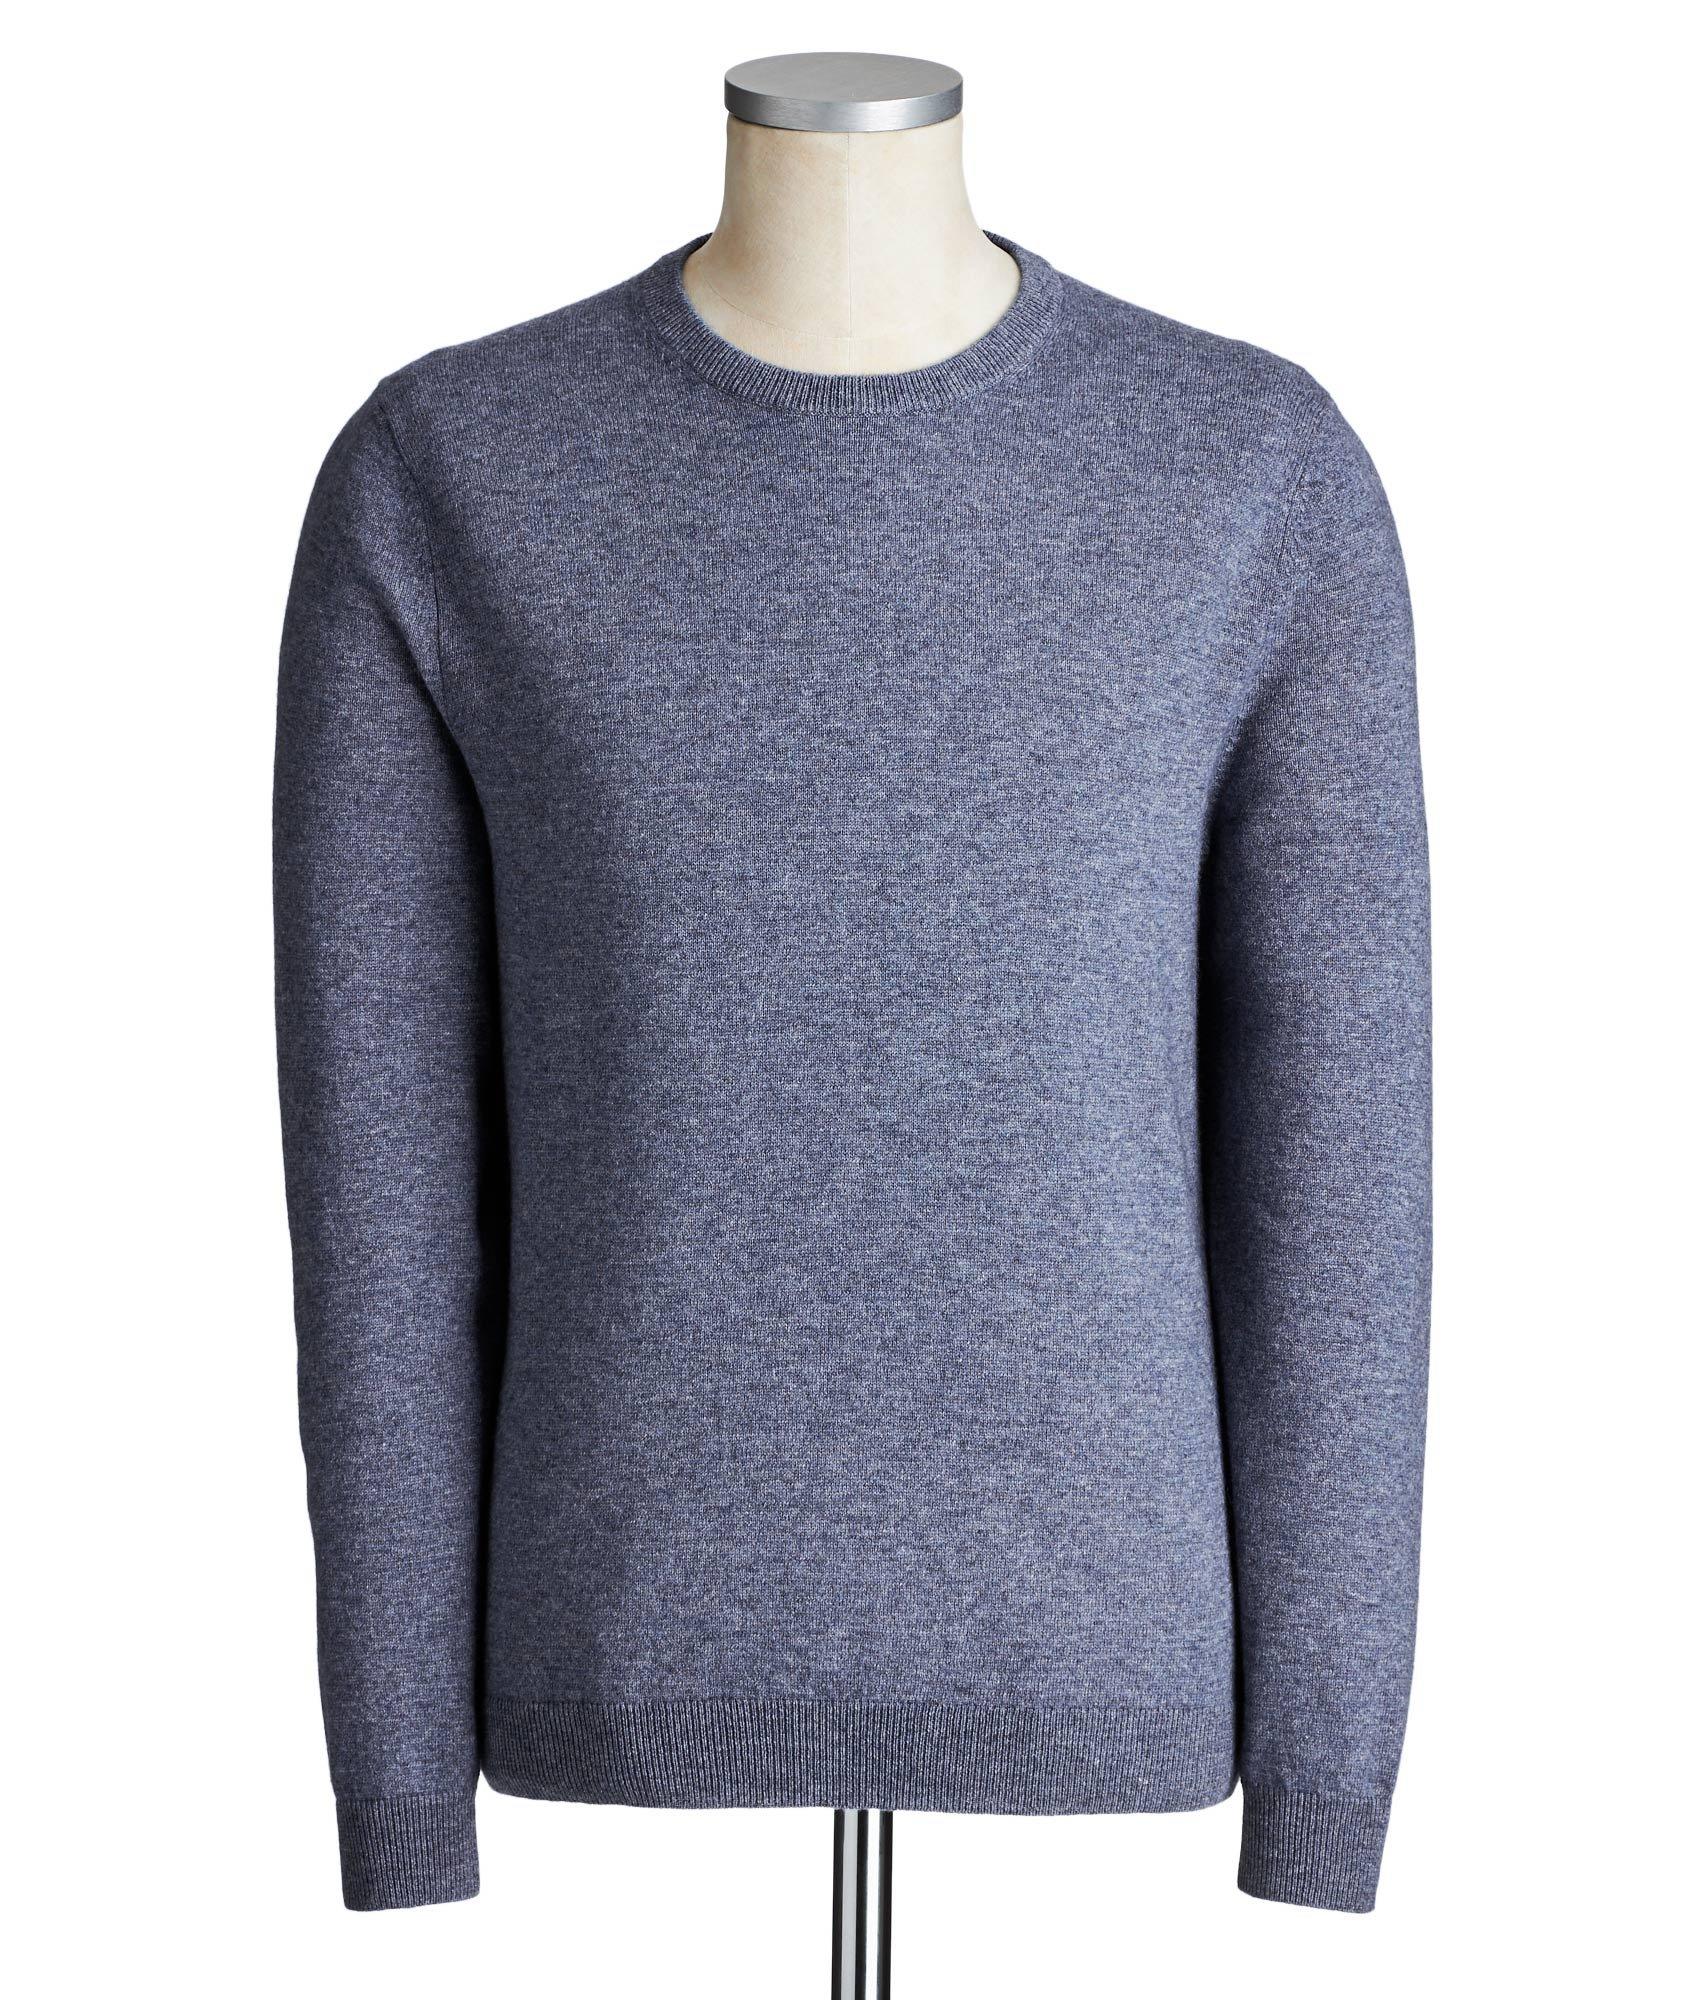 Pull en cachemire SeaCell image 0